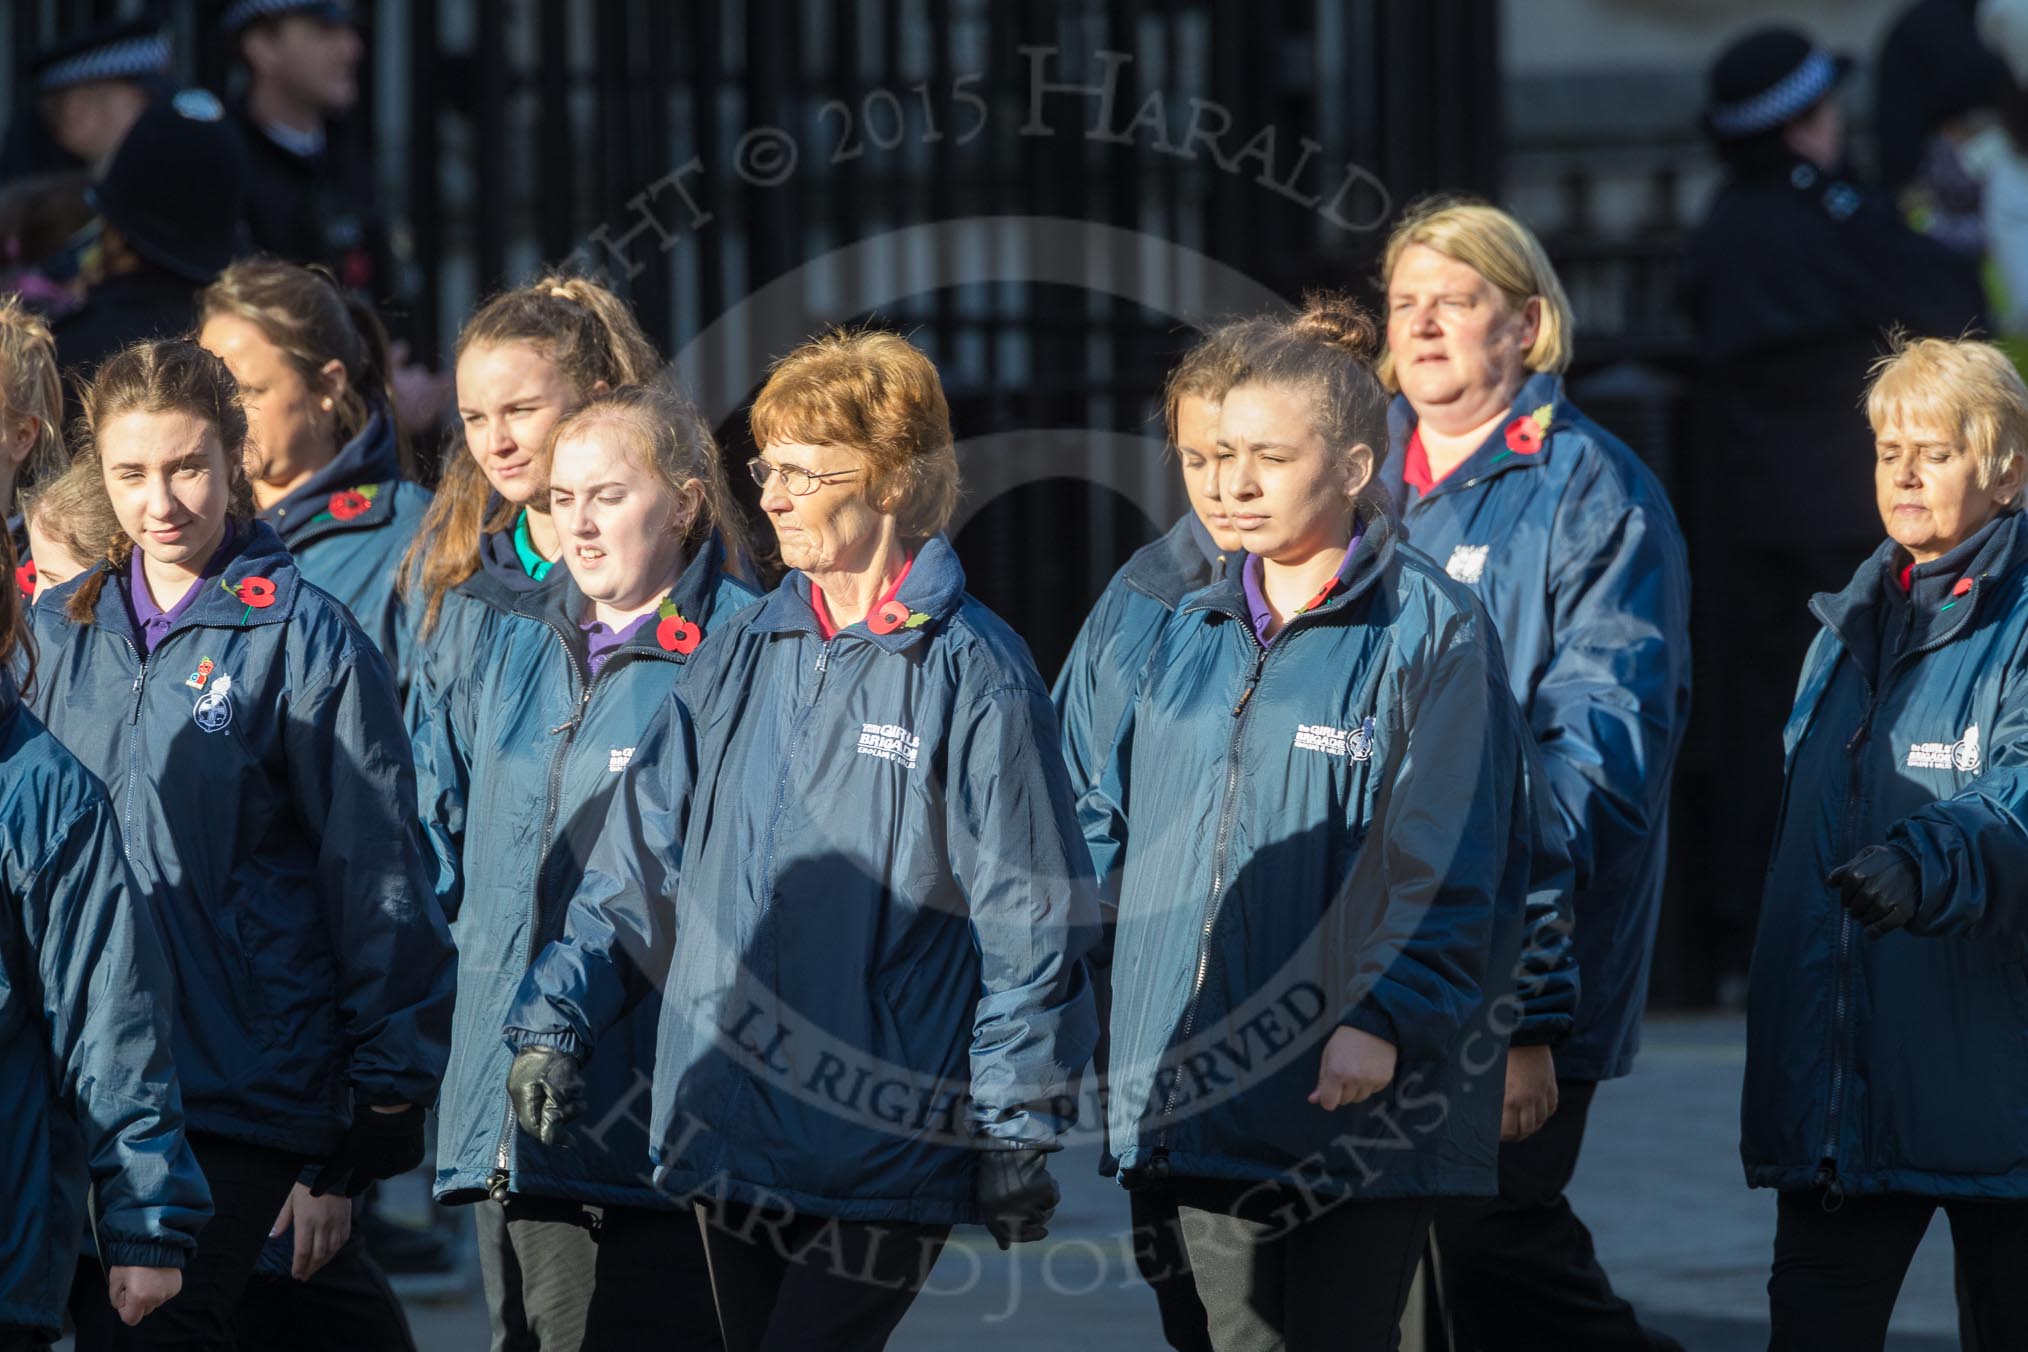 March Past, Remembrance Sunday at the Cenotaph 2016: M35 Girls Brigade England & Wales.
Cenotaph, Whitehall, London SW1,
London,
Greater London,
United Kingdom,
on 13 November 2016 at 13:18, image #2874